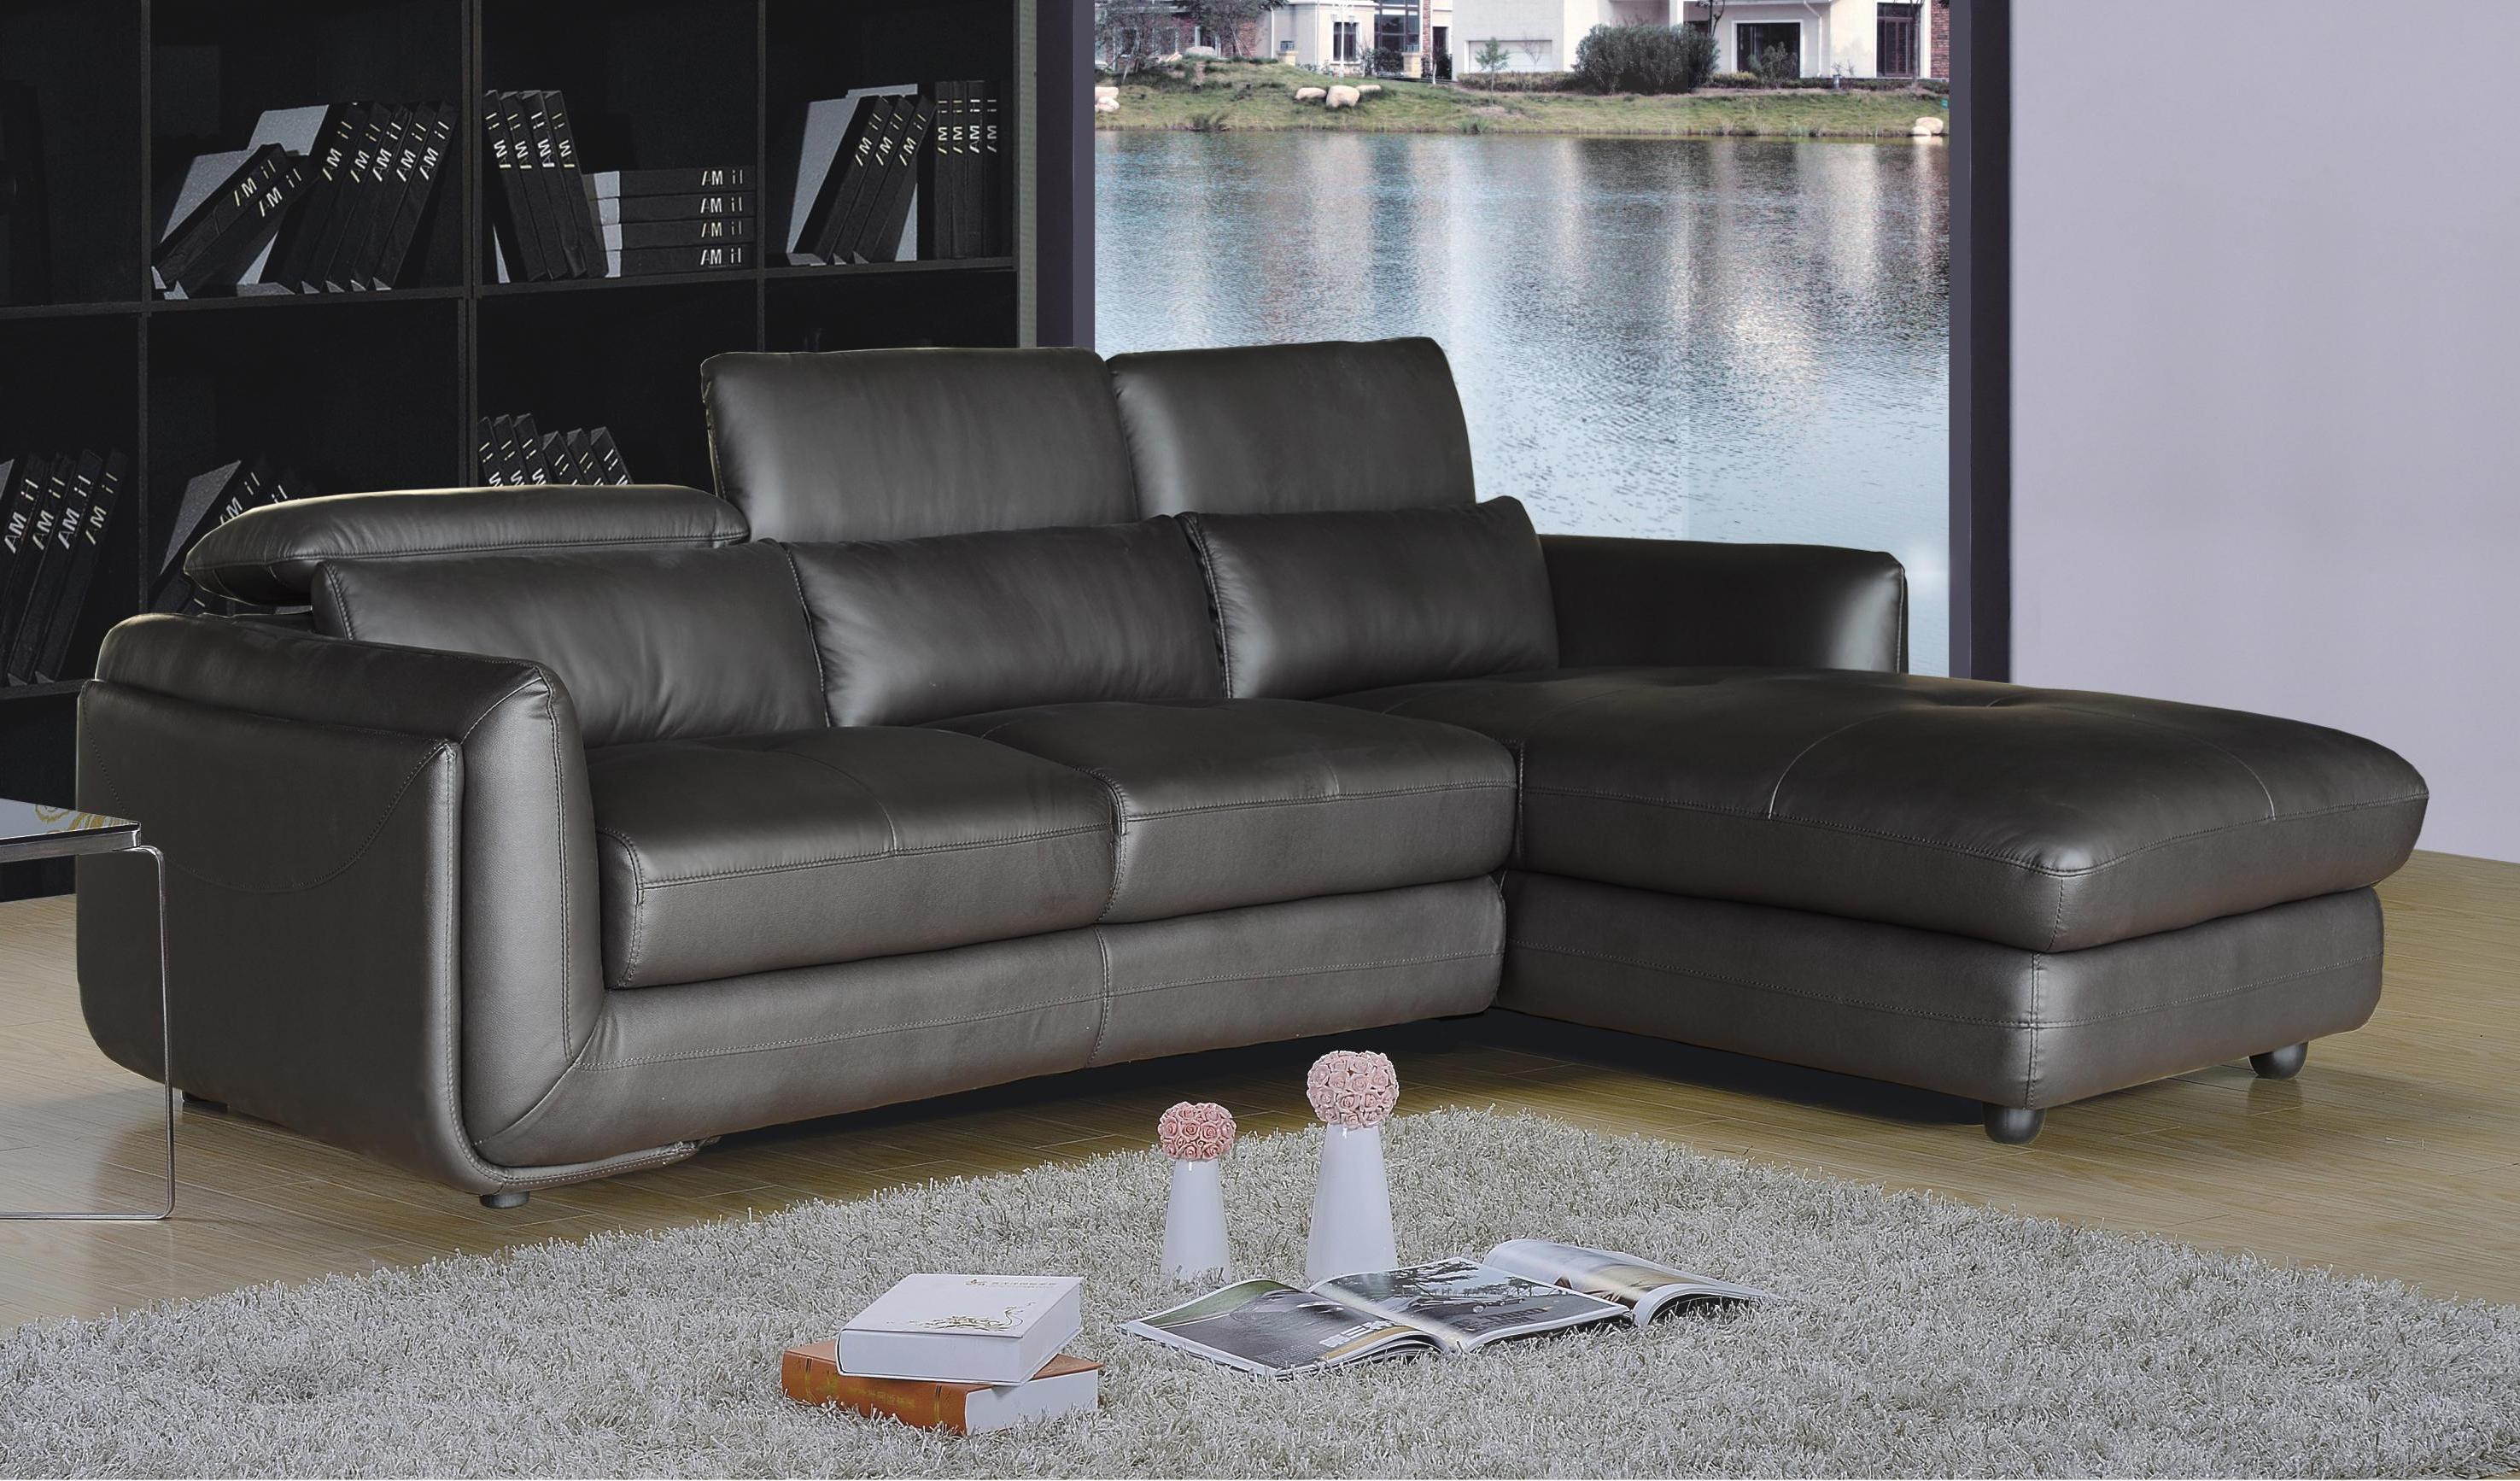 Contemporary Sectional Sofa Ron RON-2PC-SECTIONAL-R in Gray Leather Match